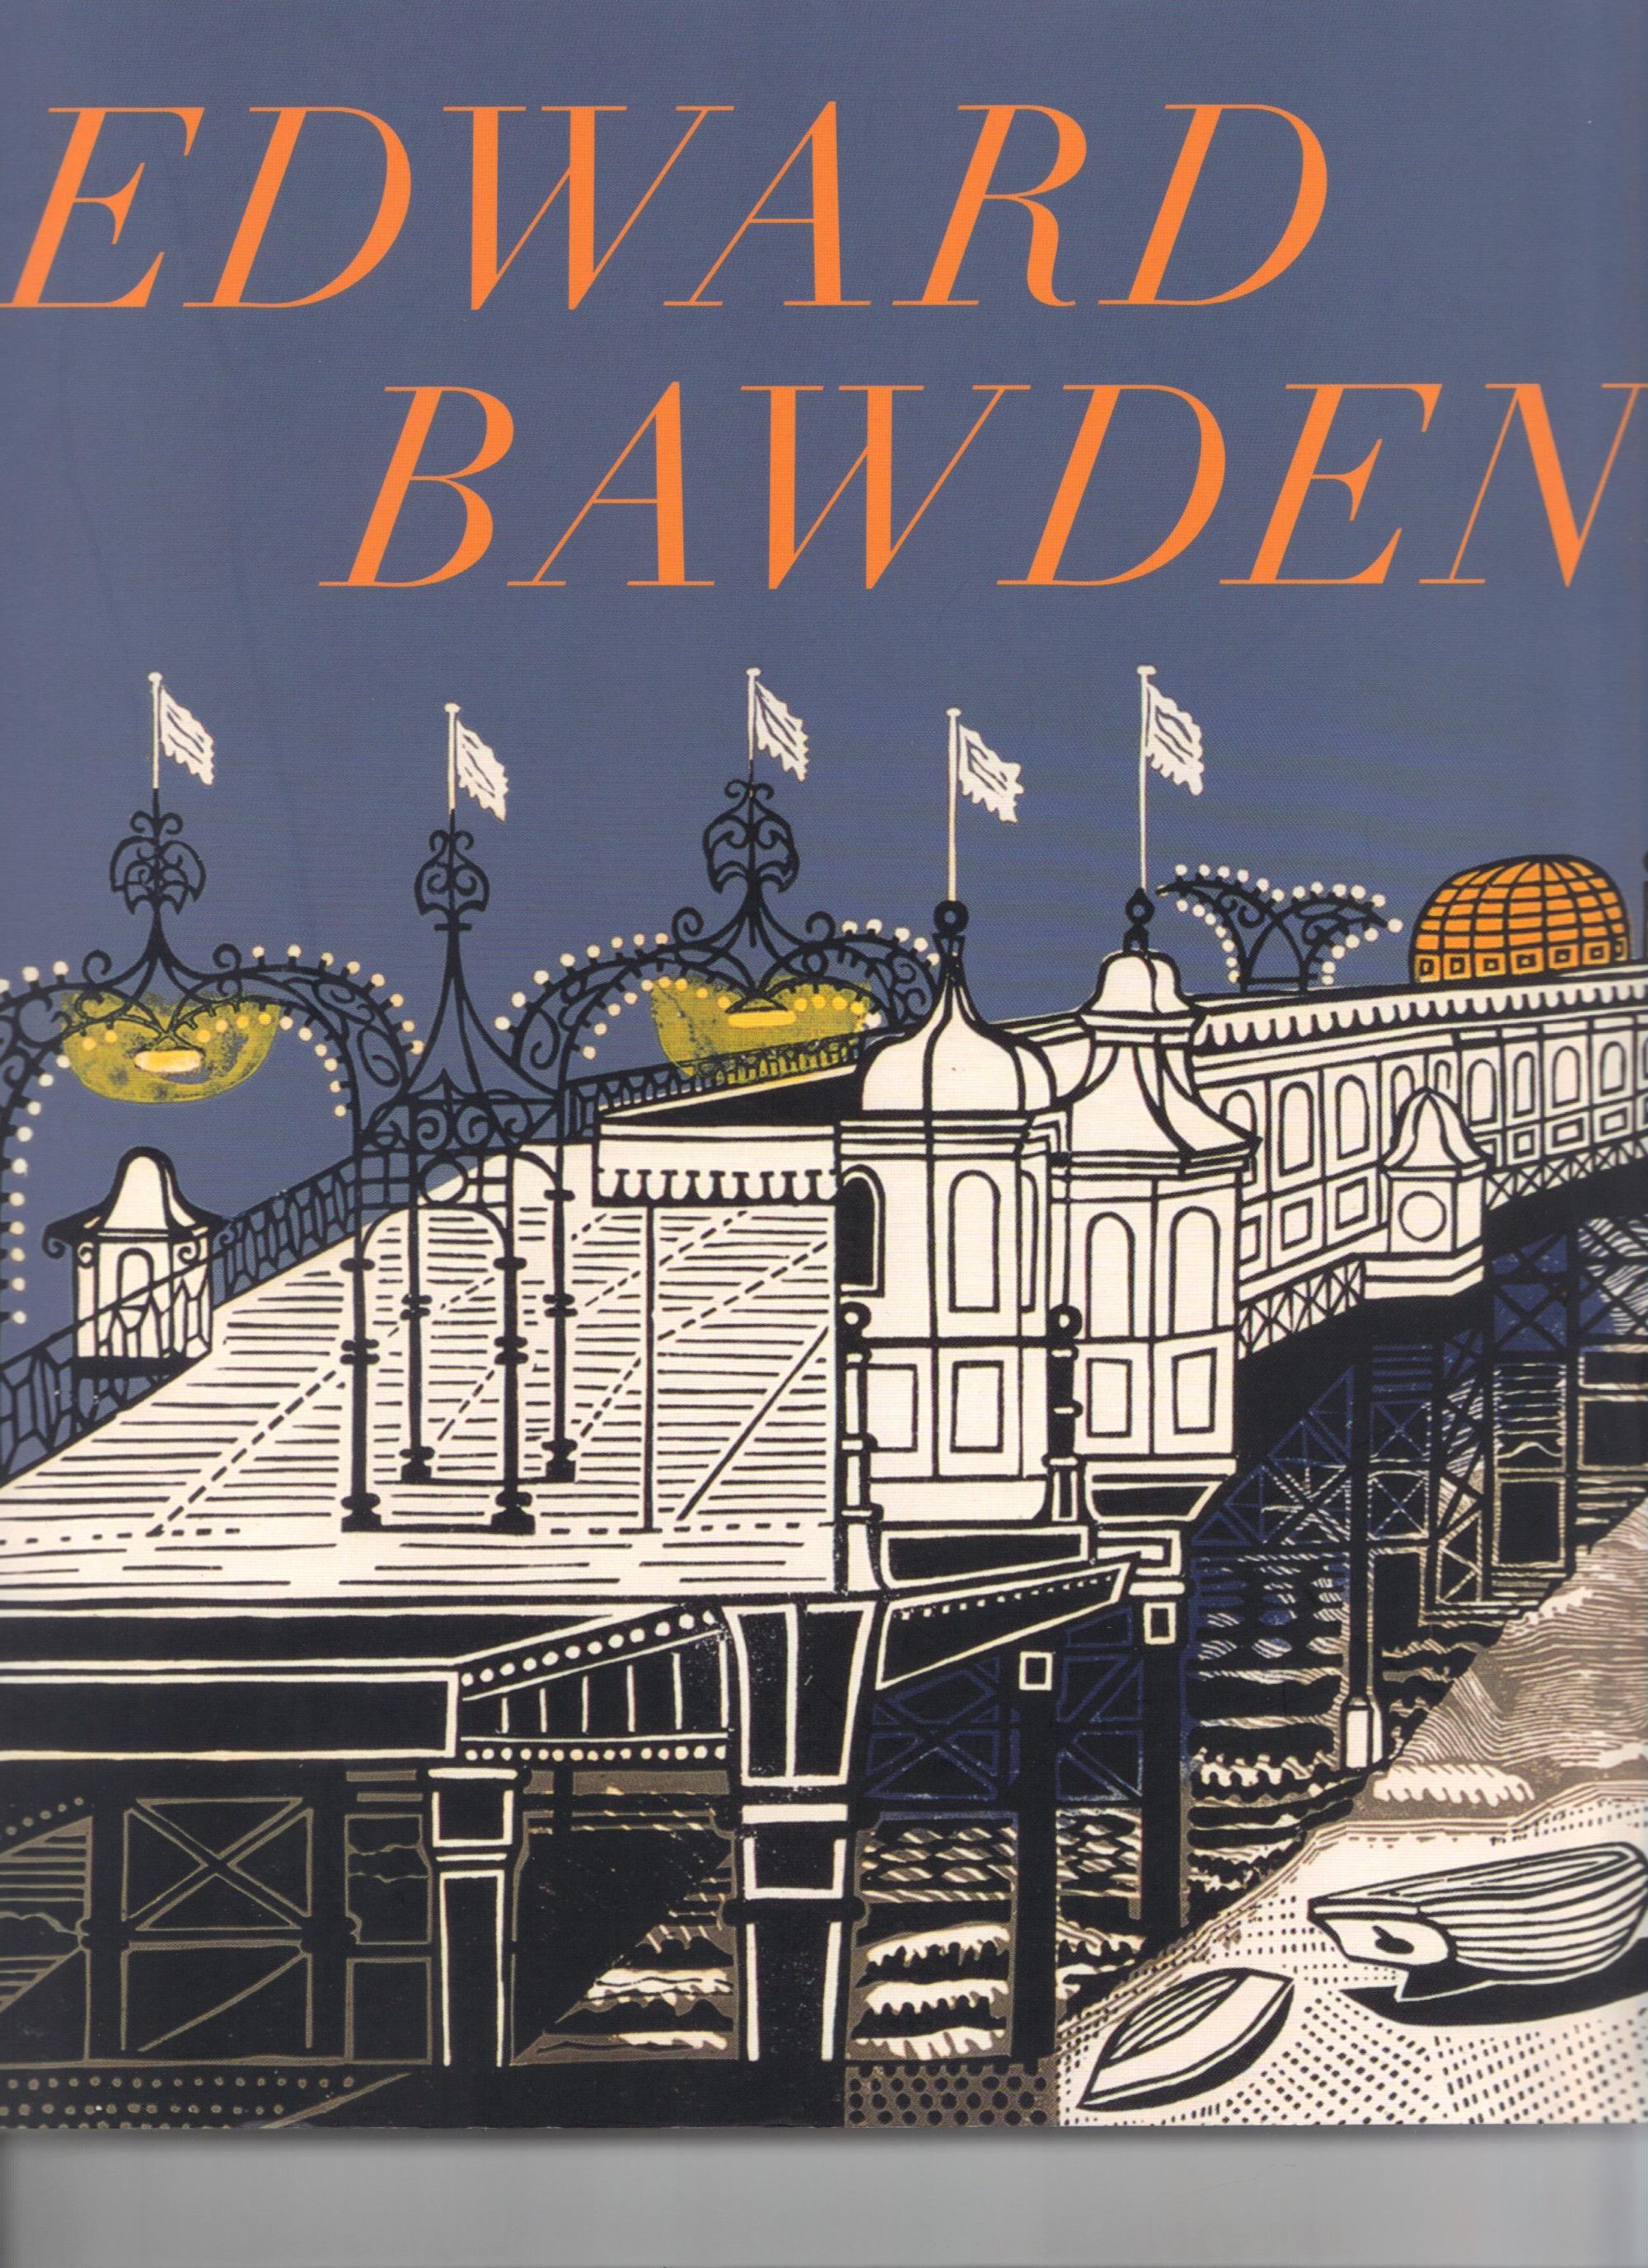 Edward Bawden at Dulwich Picture Gallery